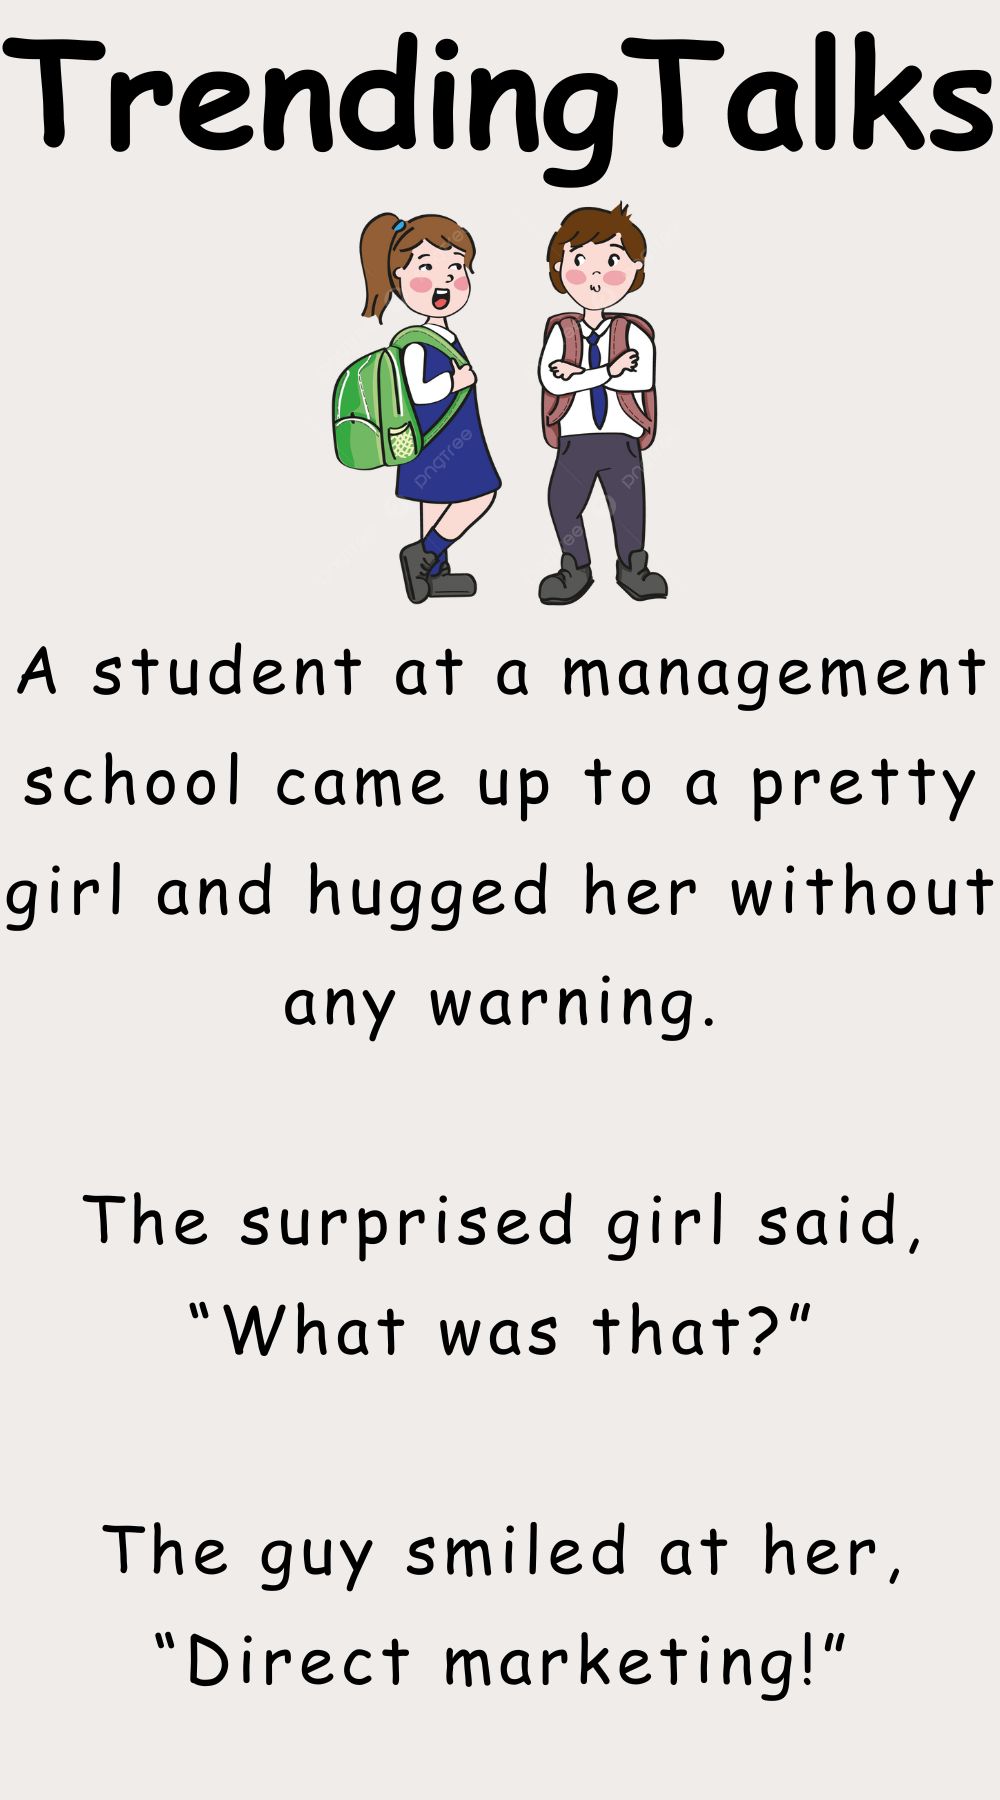 A student at a management school came up to a pretty girl